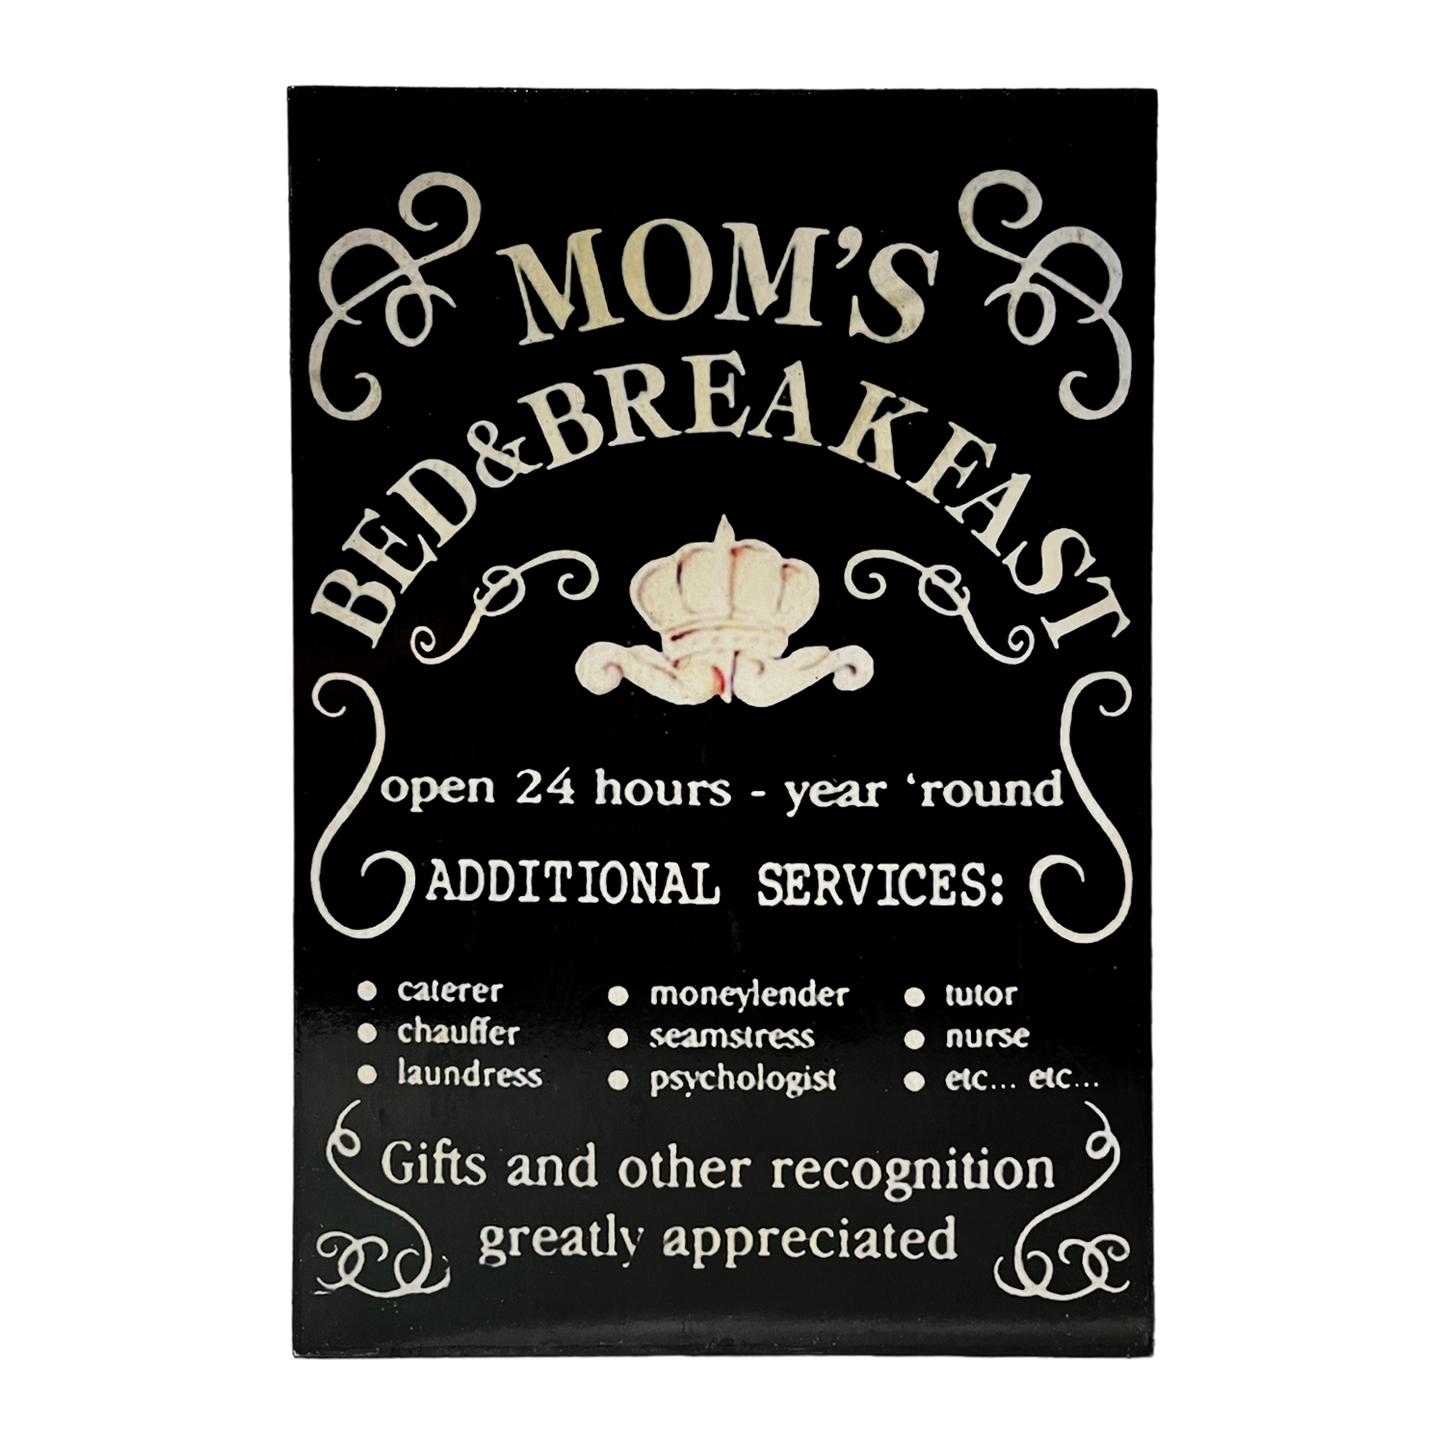 Afiche "Mom's bed & breakfast" ng